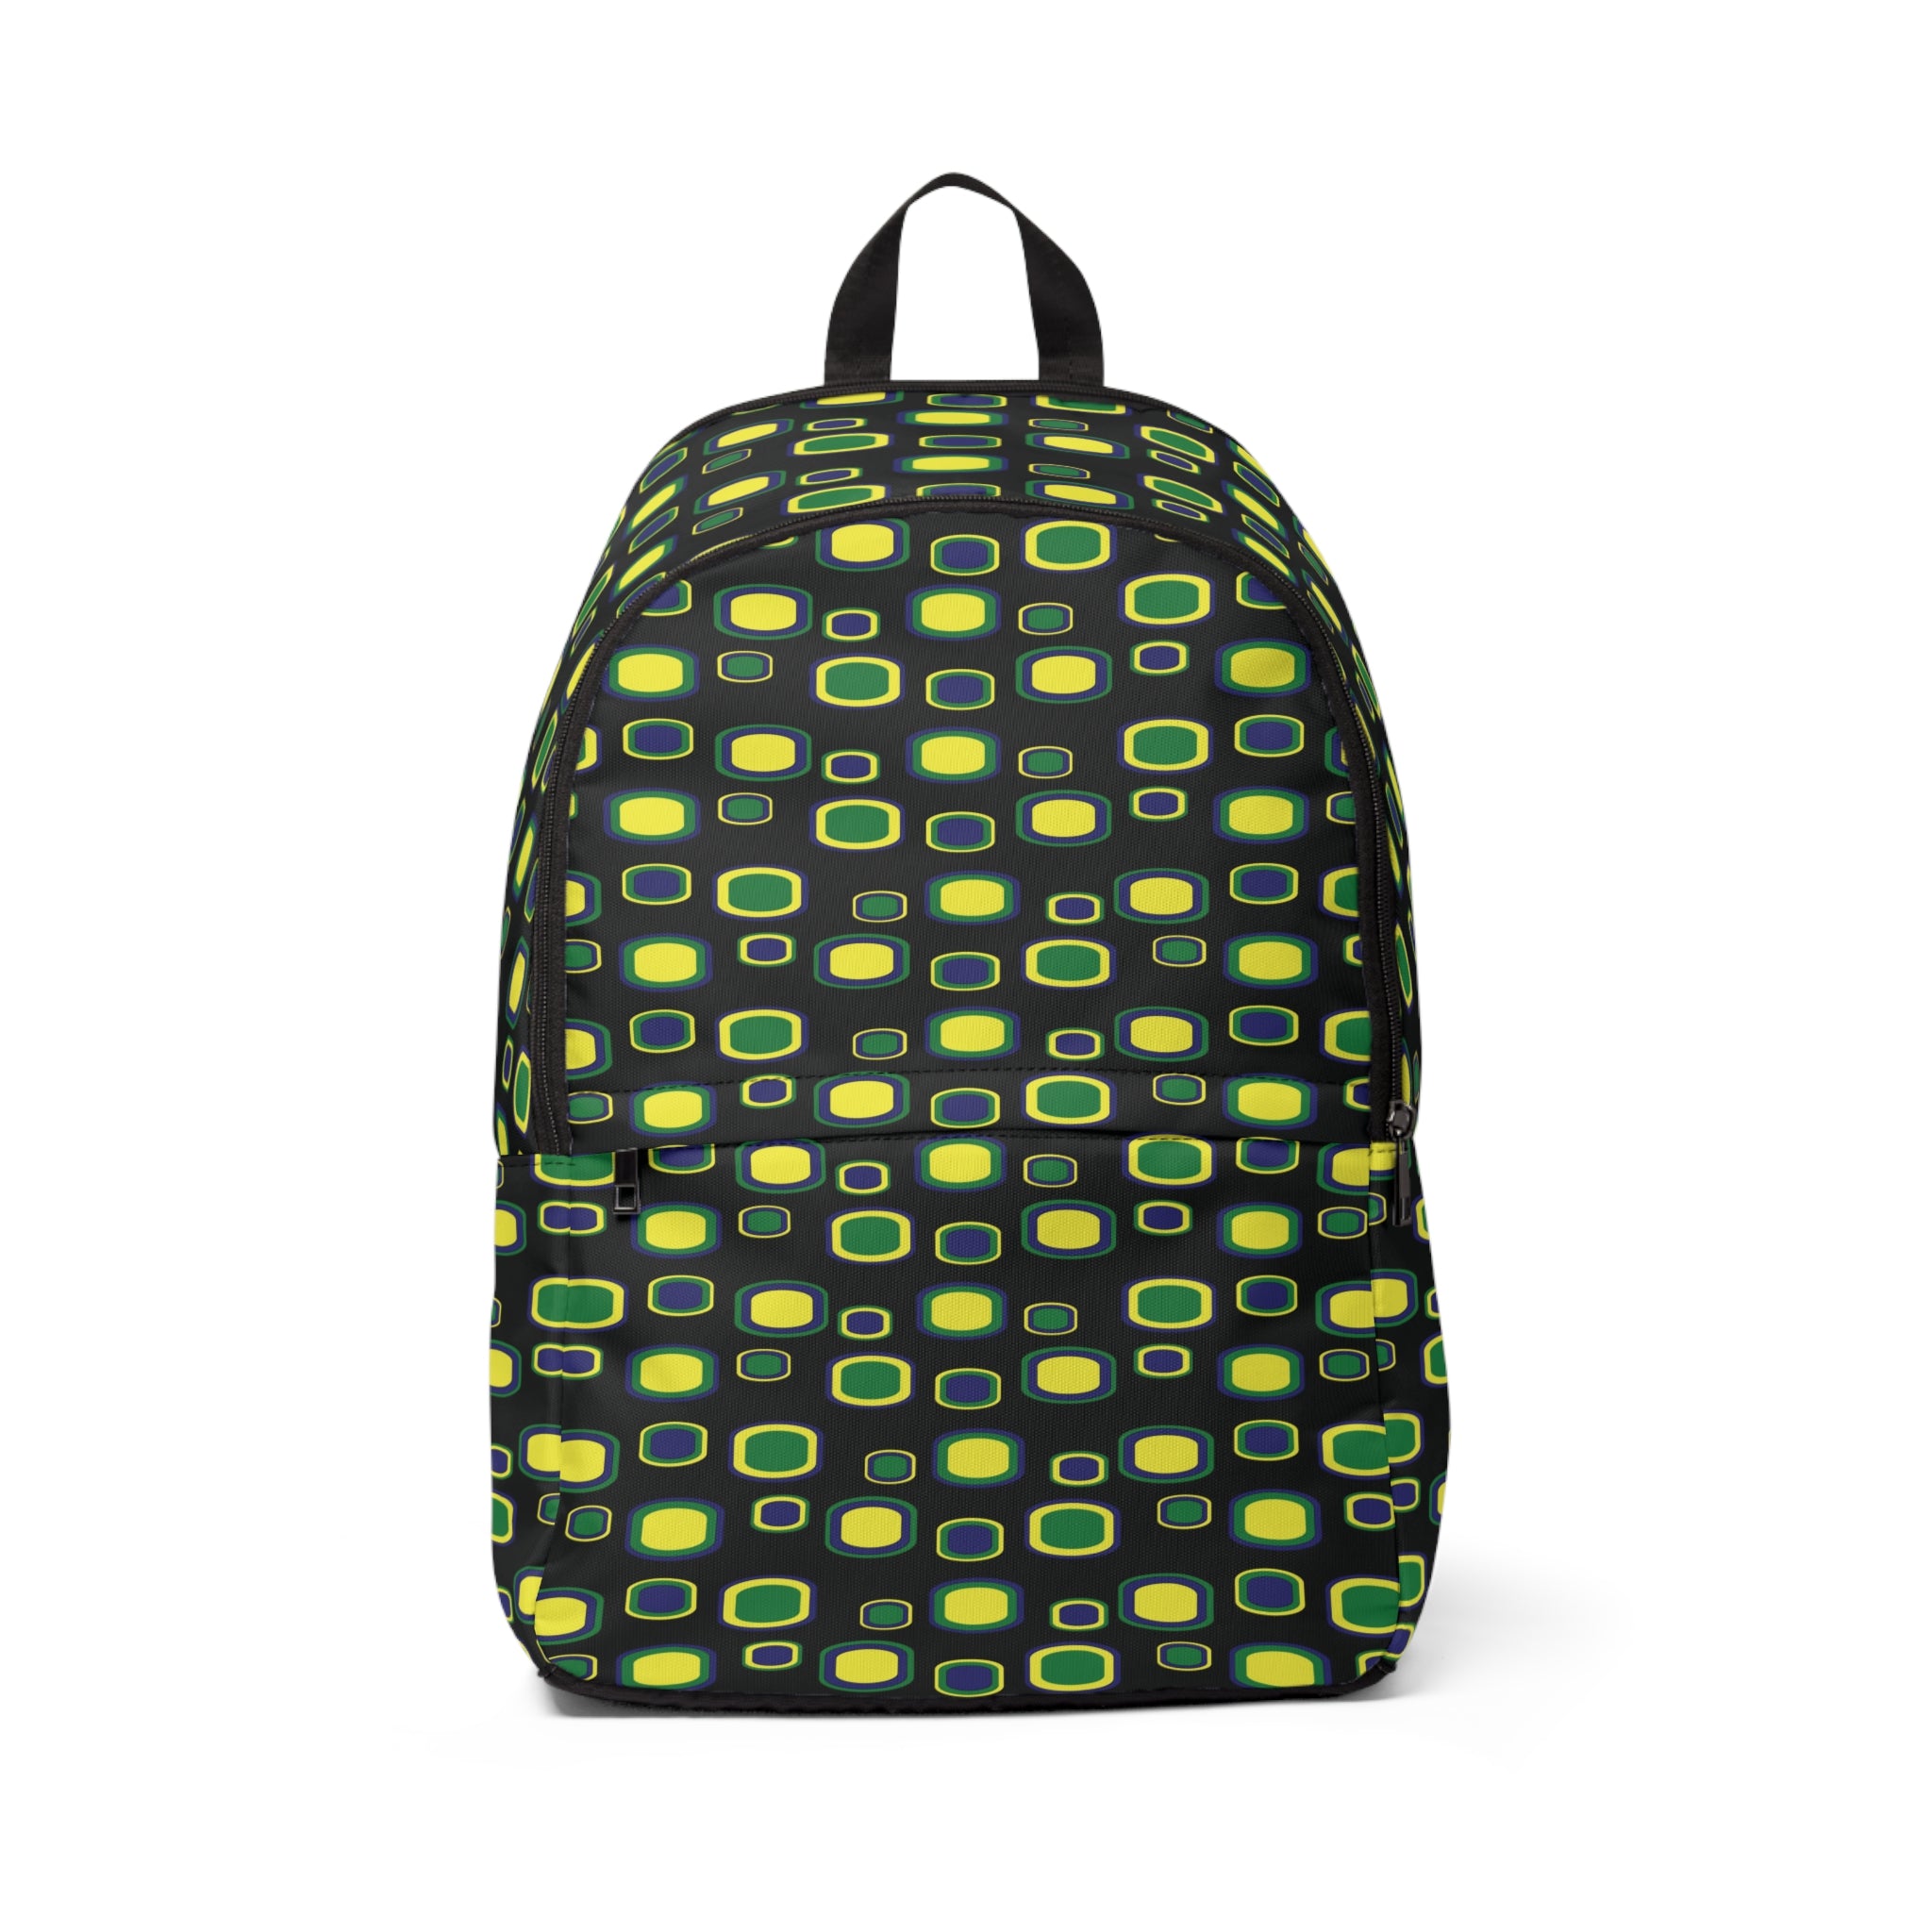 Black unisex fabric backpack with St. Vincent and the Grenadines national colored cubes